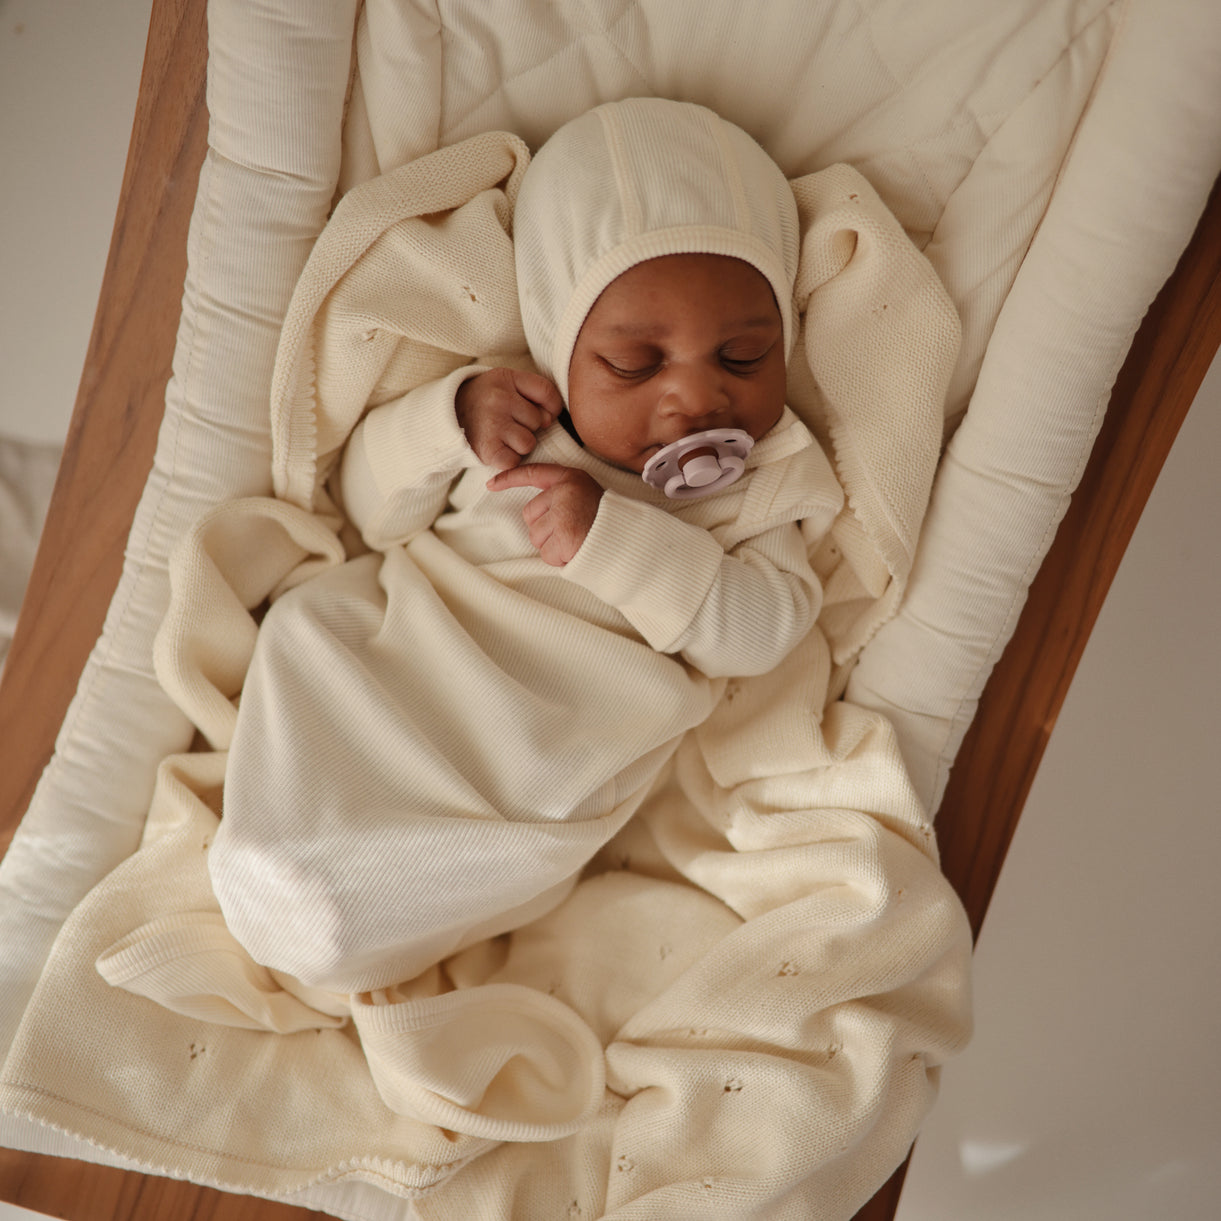 Mushie Ribbed Knotted Baby Gown - Ivory